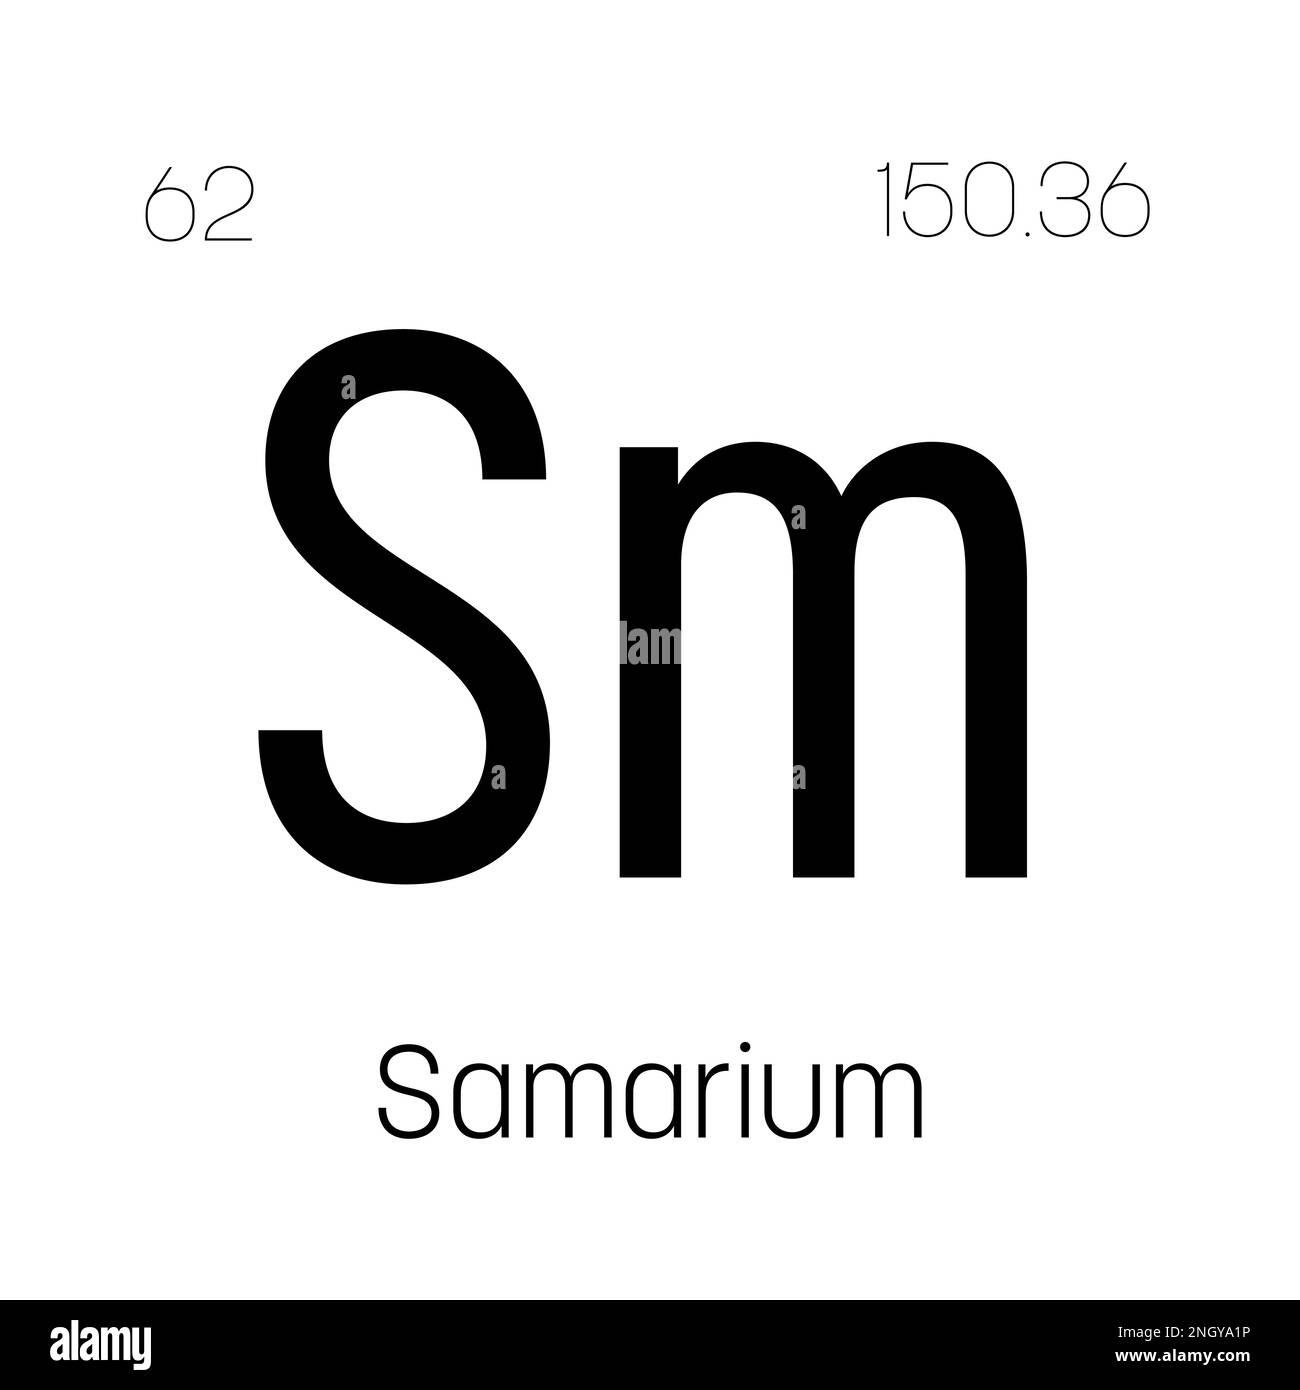 Samarium, Sm, periodic table element with name, symbol, atomic number and weight. Rare earth metal with various industrial uses, such as in magnets, lighting, and as a component in certain types of glass. Stock Vector